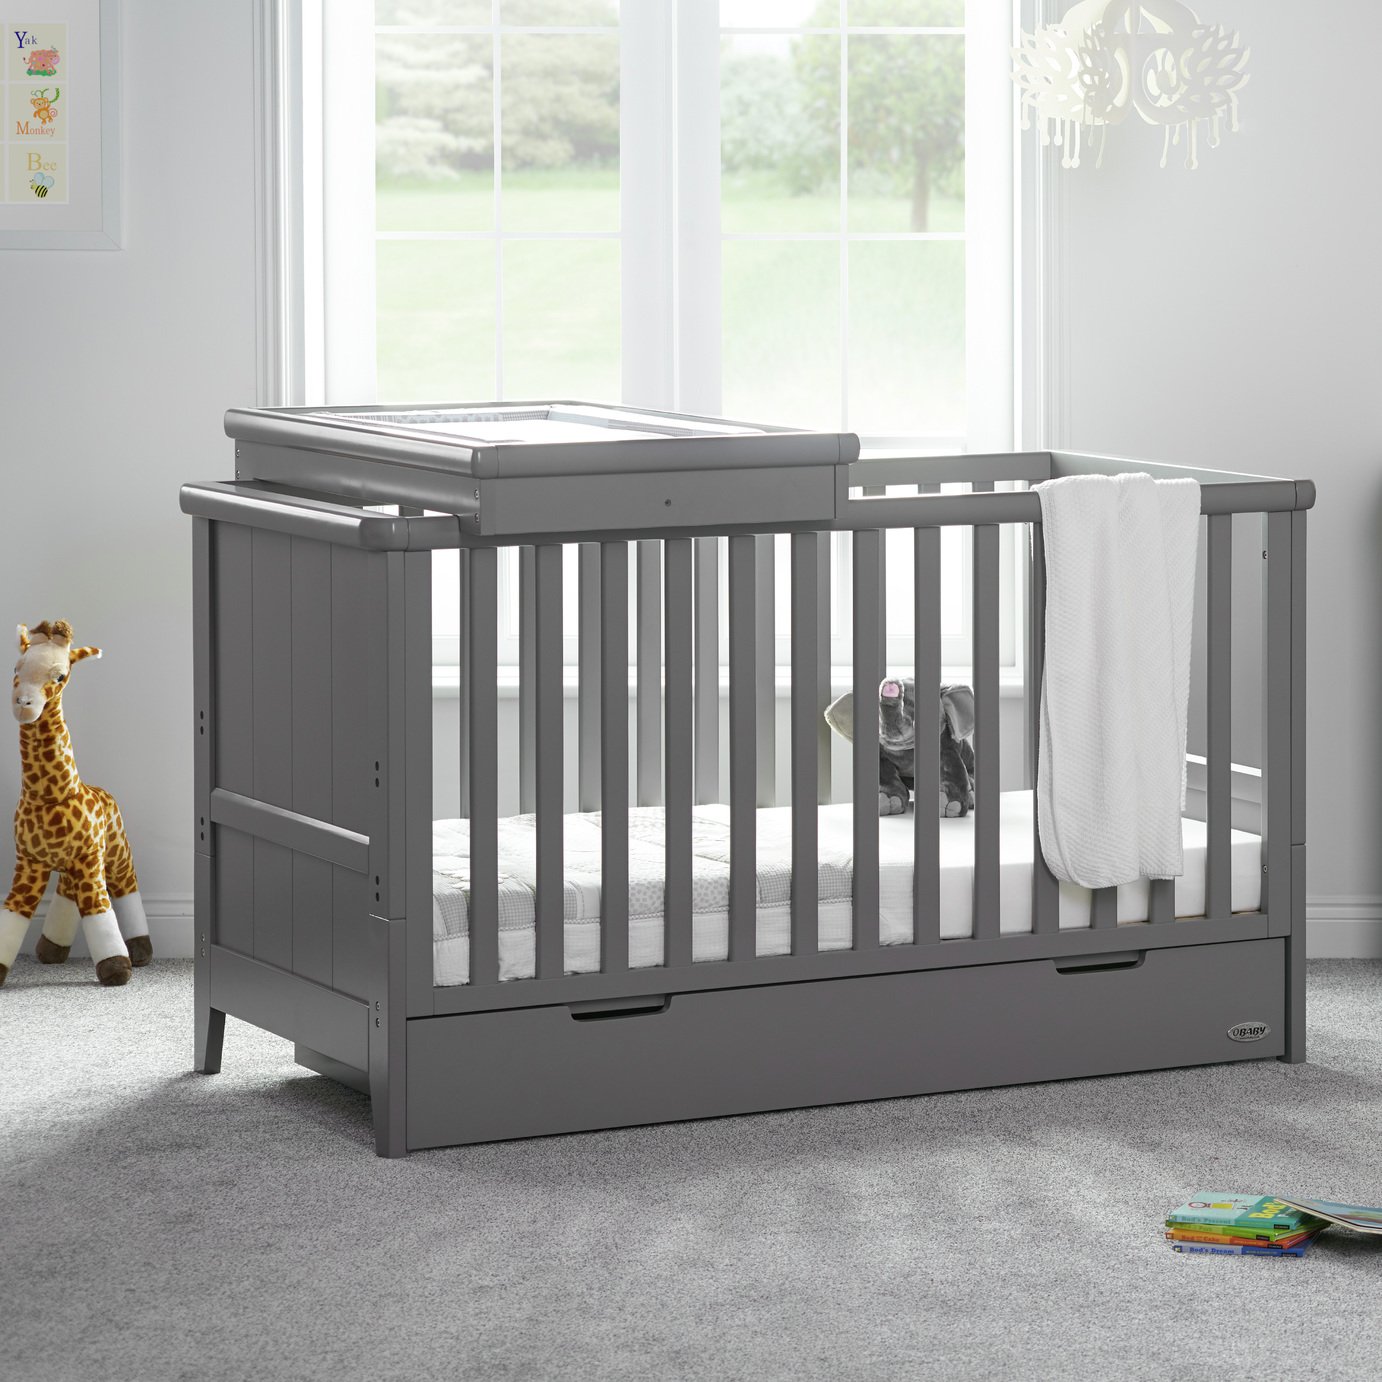 baby changing unit top